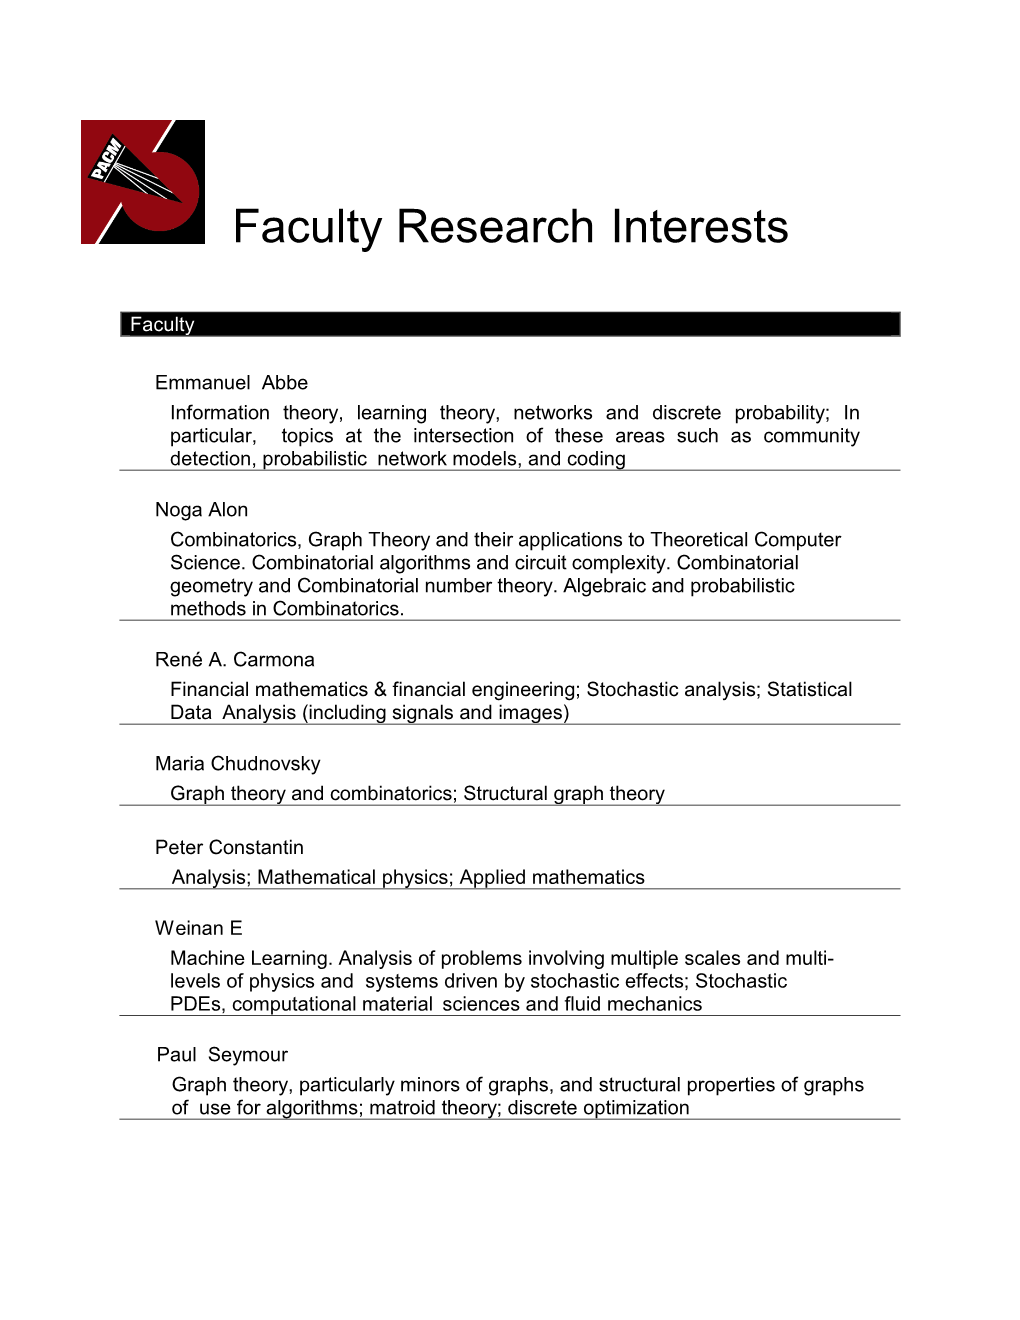 Faculty Research Interests